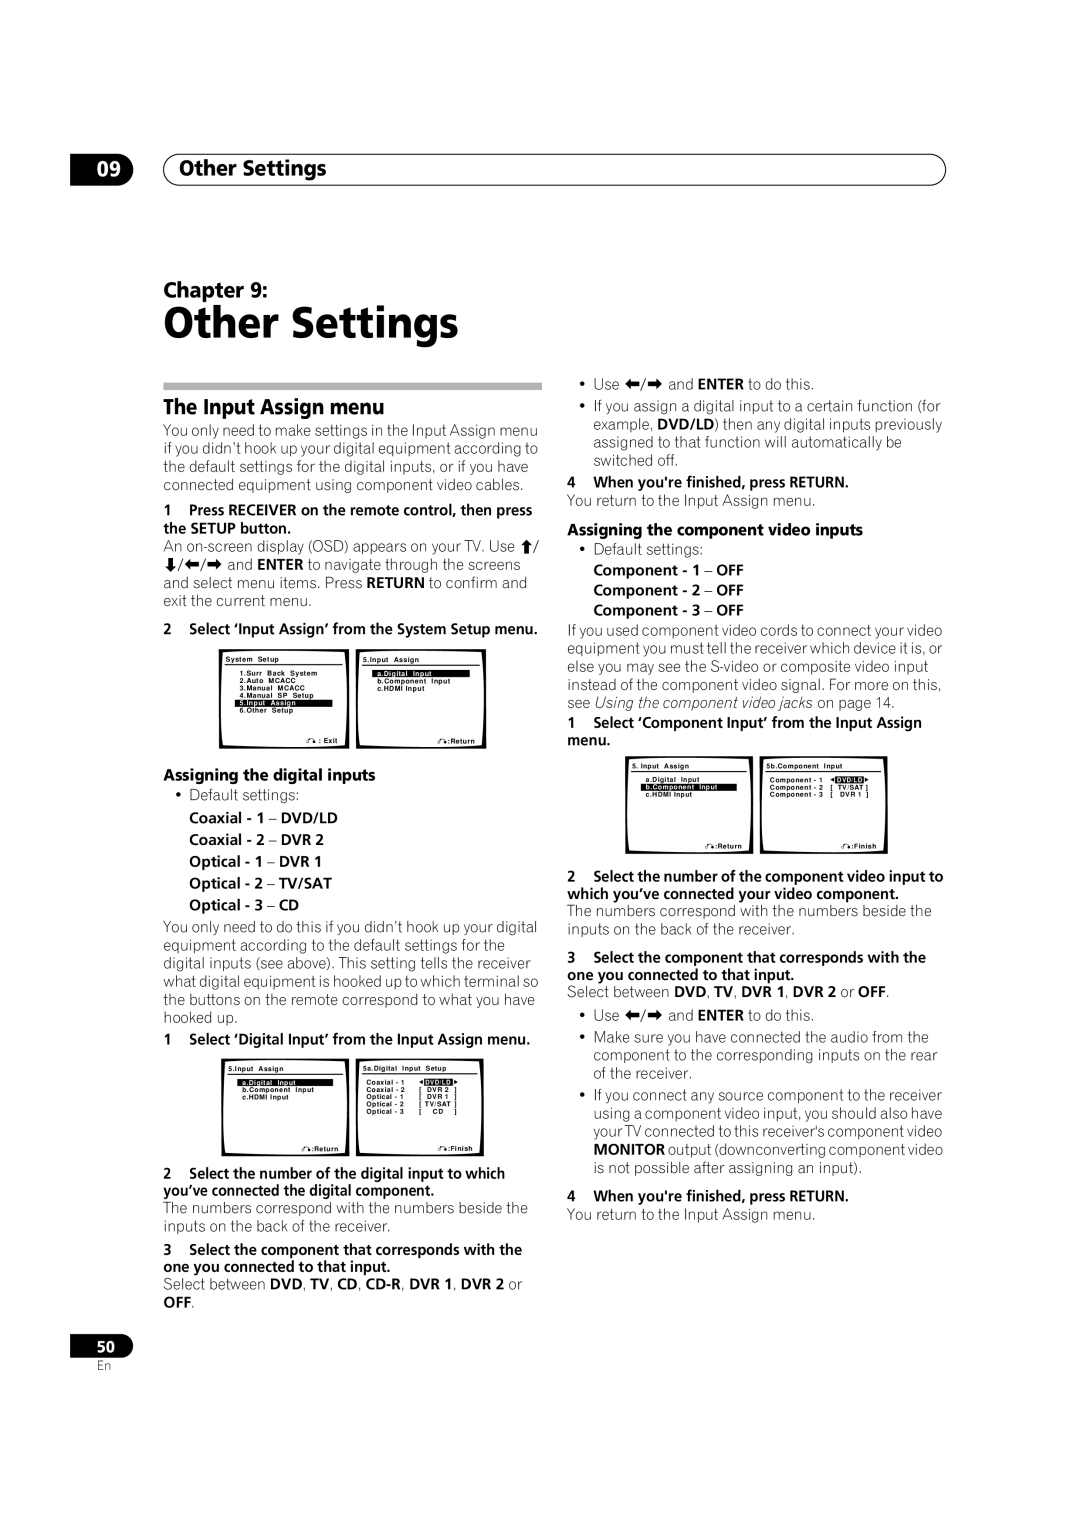 Classe Audio VSX-80TXV-S manual 09Other Settings Chapter, The Input Assign menu, Assigning the digital inputs 